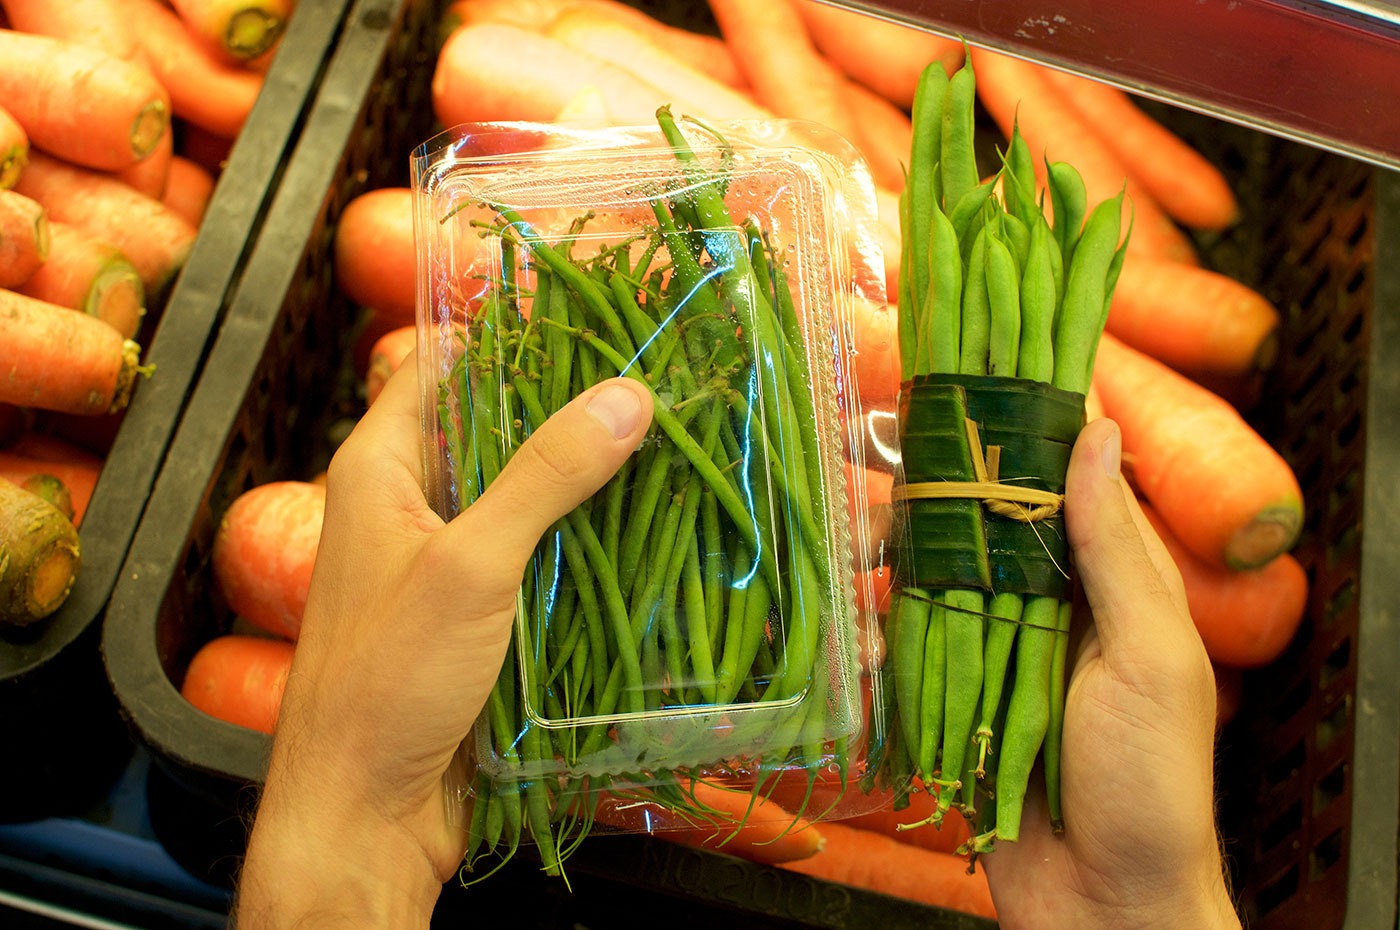 Beans bundled in a plastic package and other beans wrapped in Banana leaf held in female hands